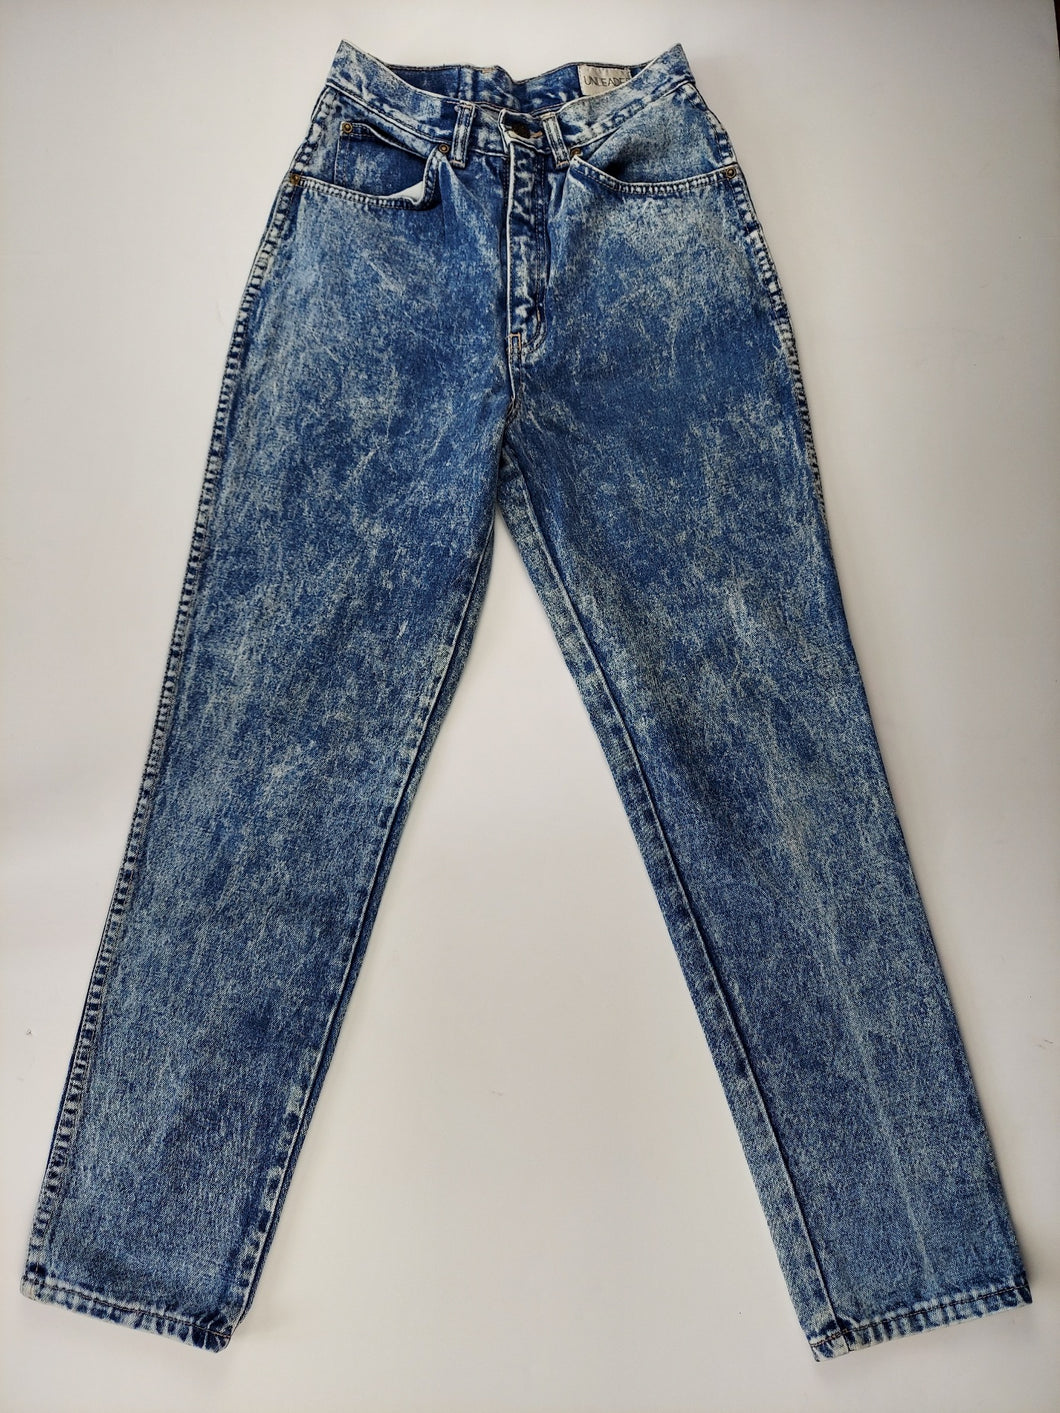 SMALL vintage acid wash tapered jeans